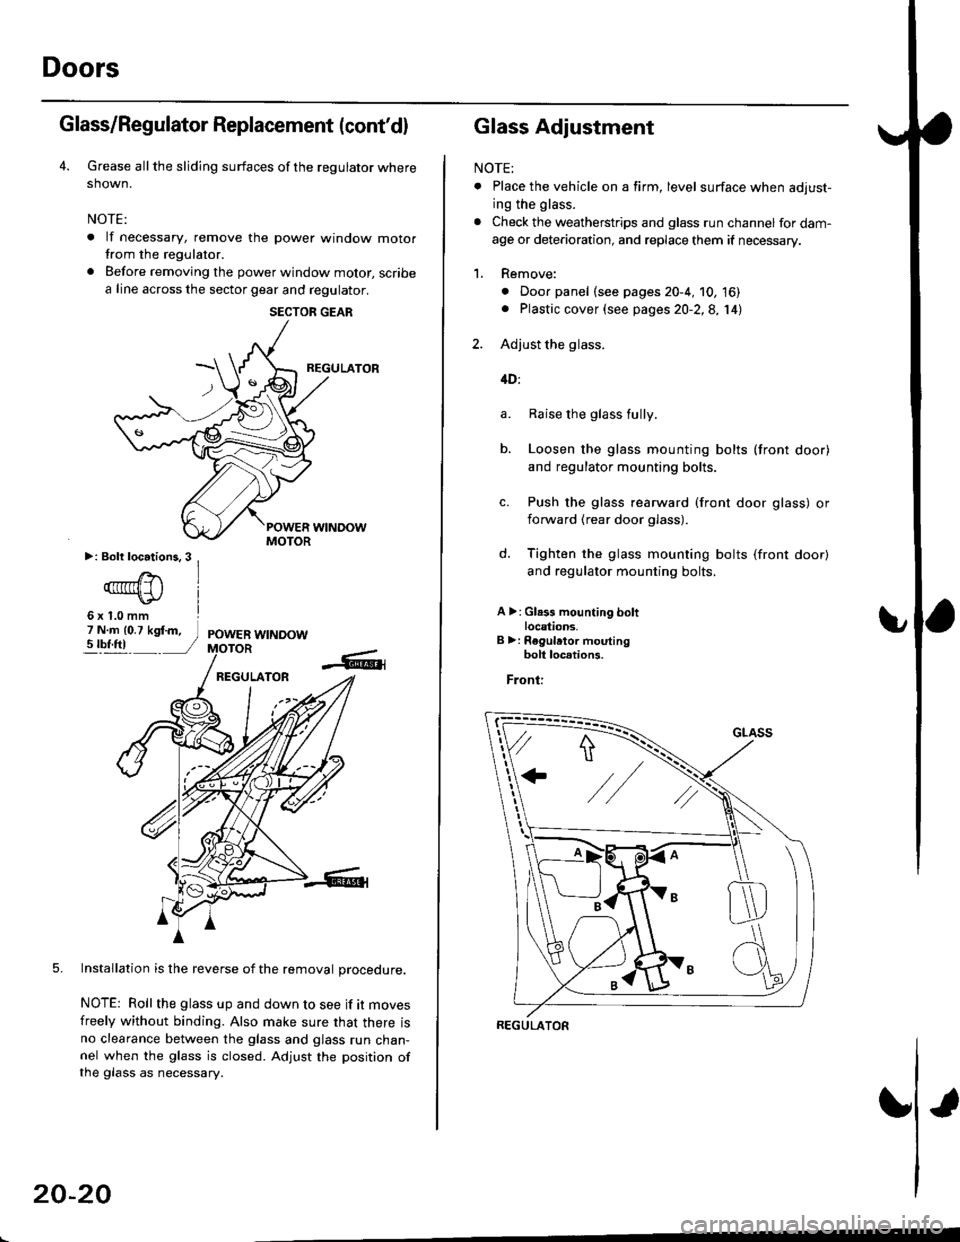 HONDA CIVIC 1999 6.G Owners Manual Doors
Glass/Regulator Replacement (contdl
Grease all the sliding surfaces of the regulator where
shown.
NOTE:
. lf necessary, remove the power window motorfrom the regulator.
. Before removing the po